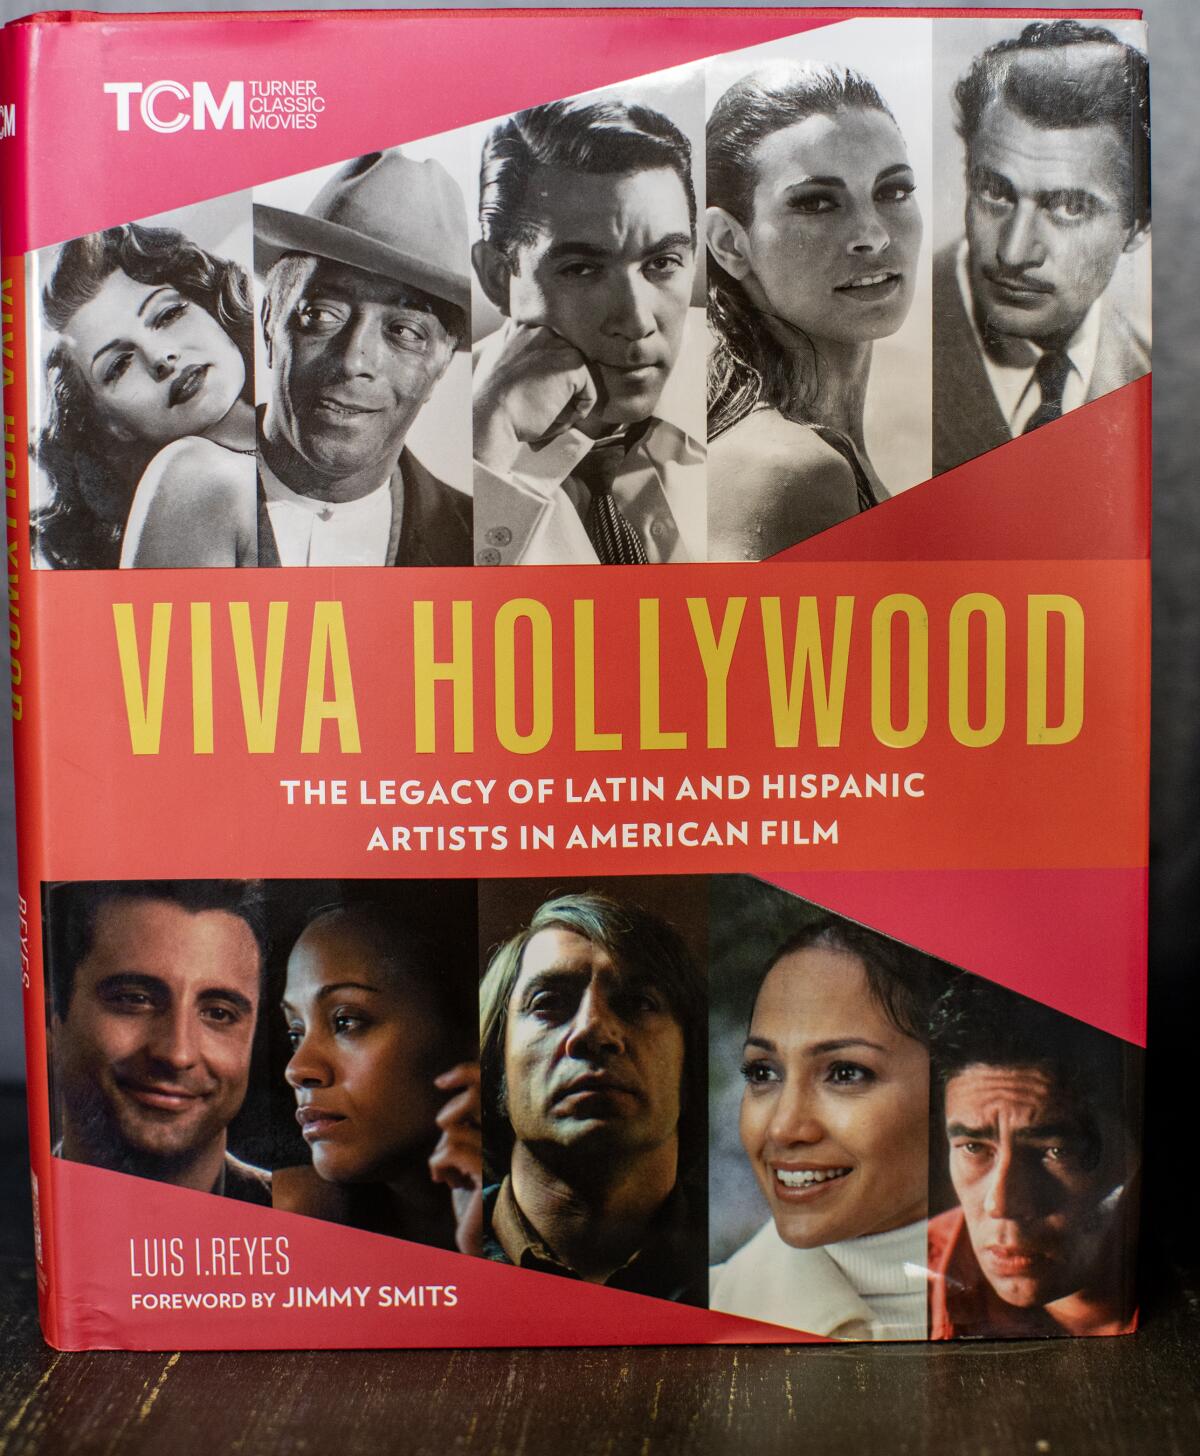 Book cover of "Viva Hollywood" features publicity shots of film stars. 